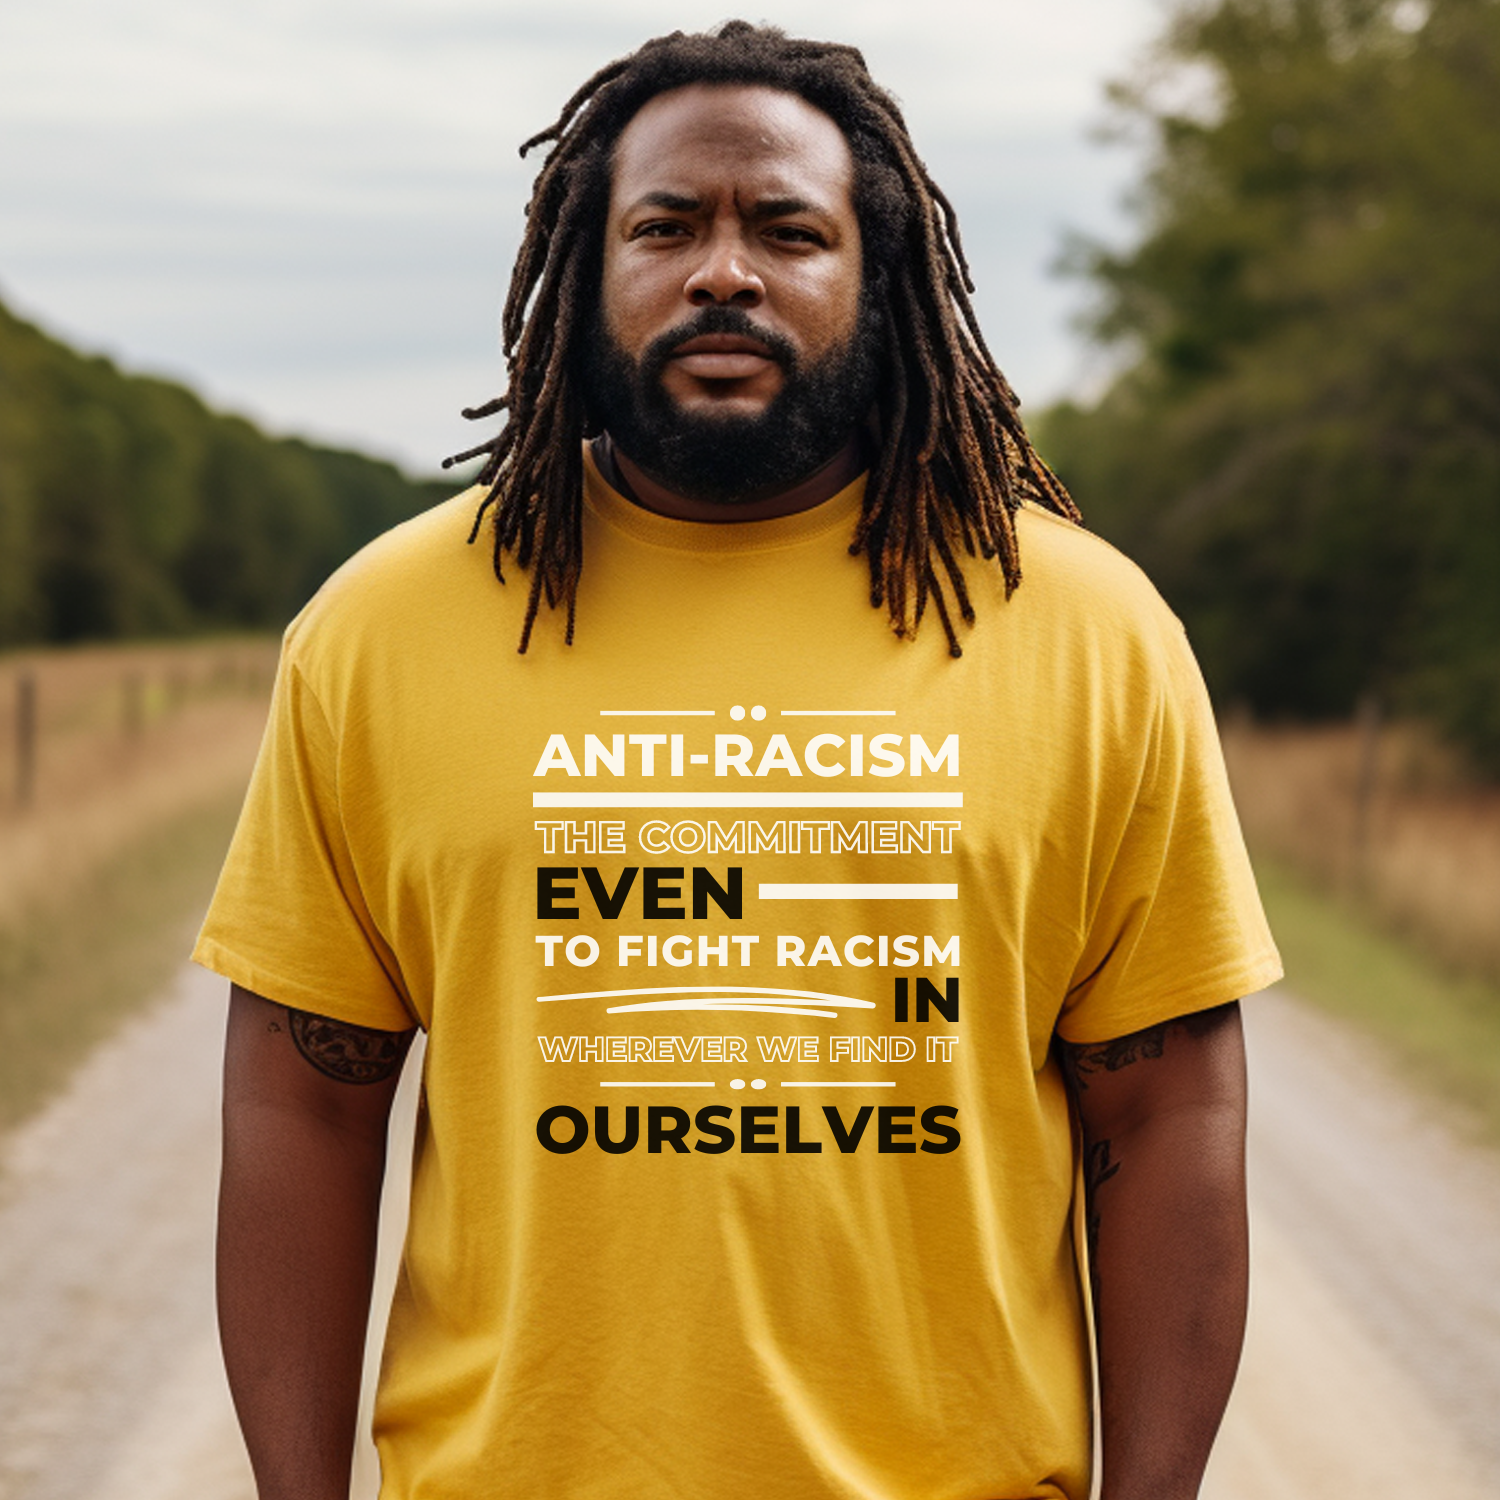 When you wear this citrus-colored men's tee with an anti-racism commitment design, you'll send a clear message that your are willing to stand up and speak out for social justice and racial equality.